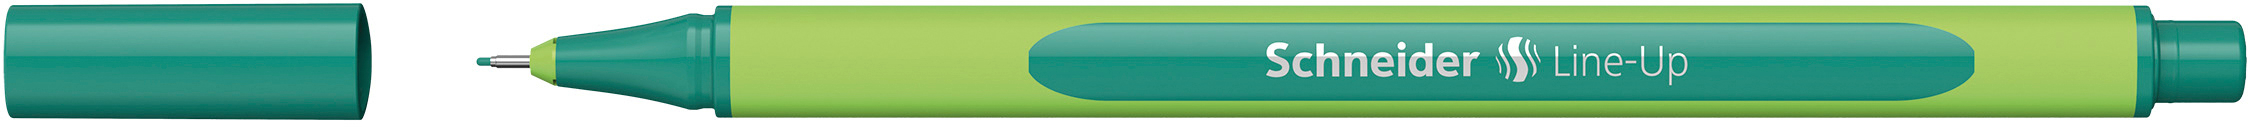 SCHNEIDER Fineliner Line-Up 191014 turquoise turquoise